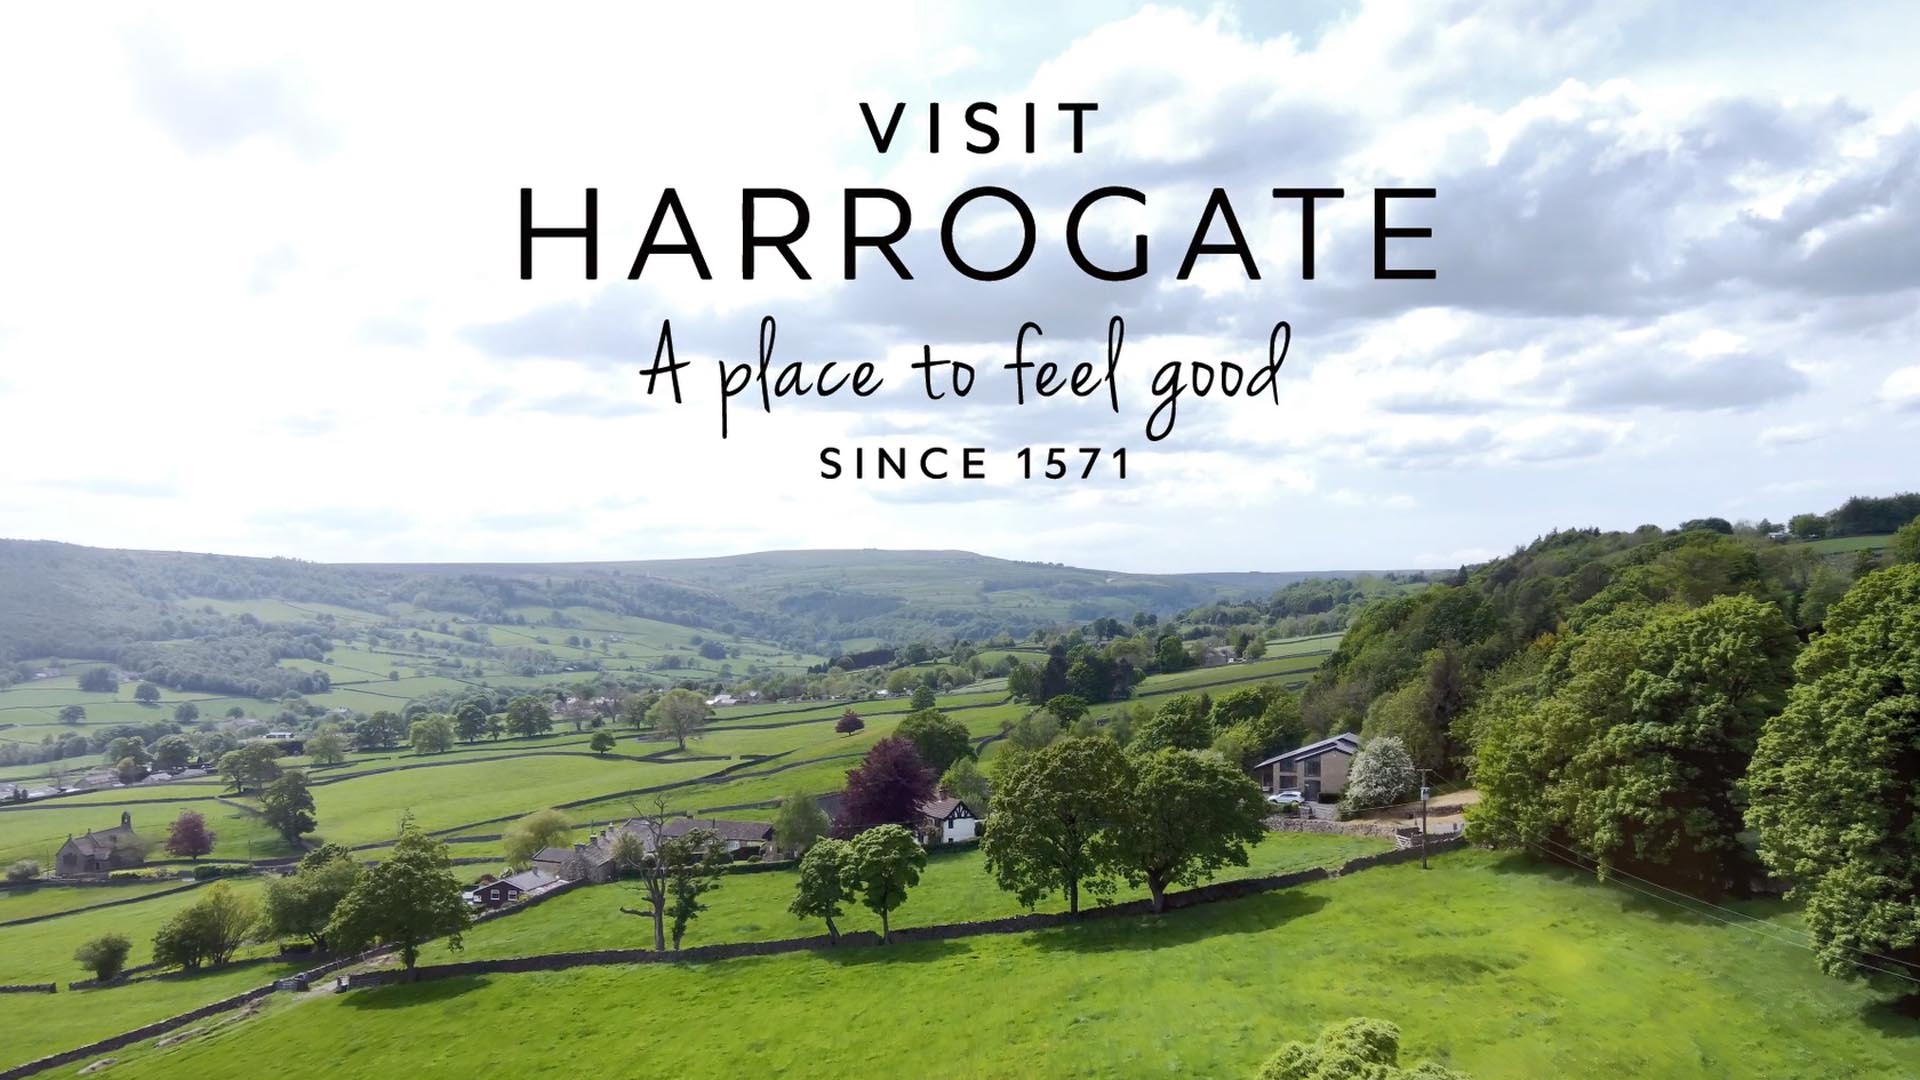 Showcasing Harrogate as a place to feel good